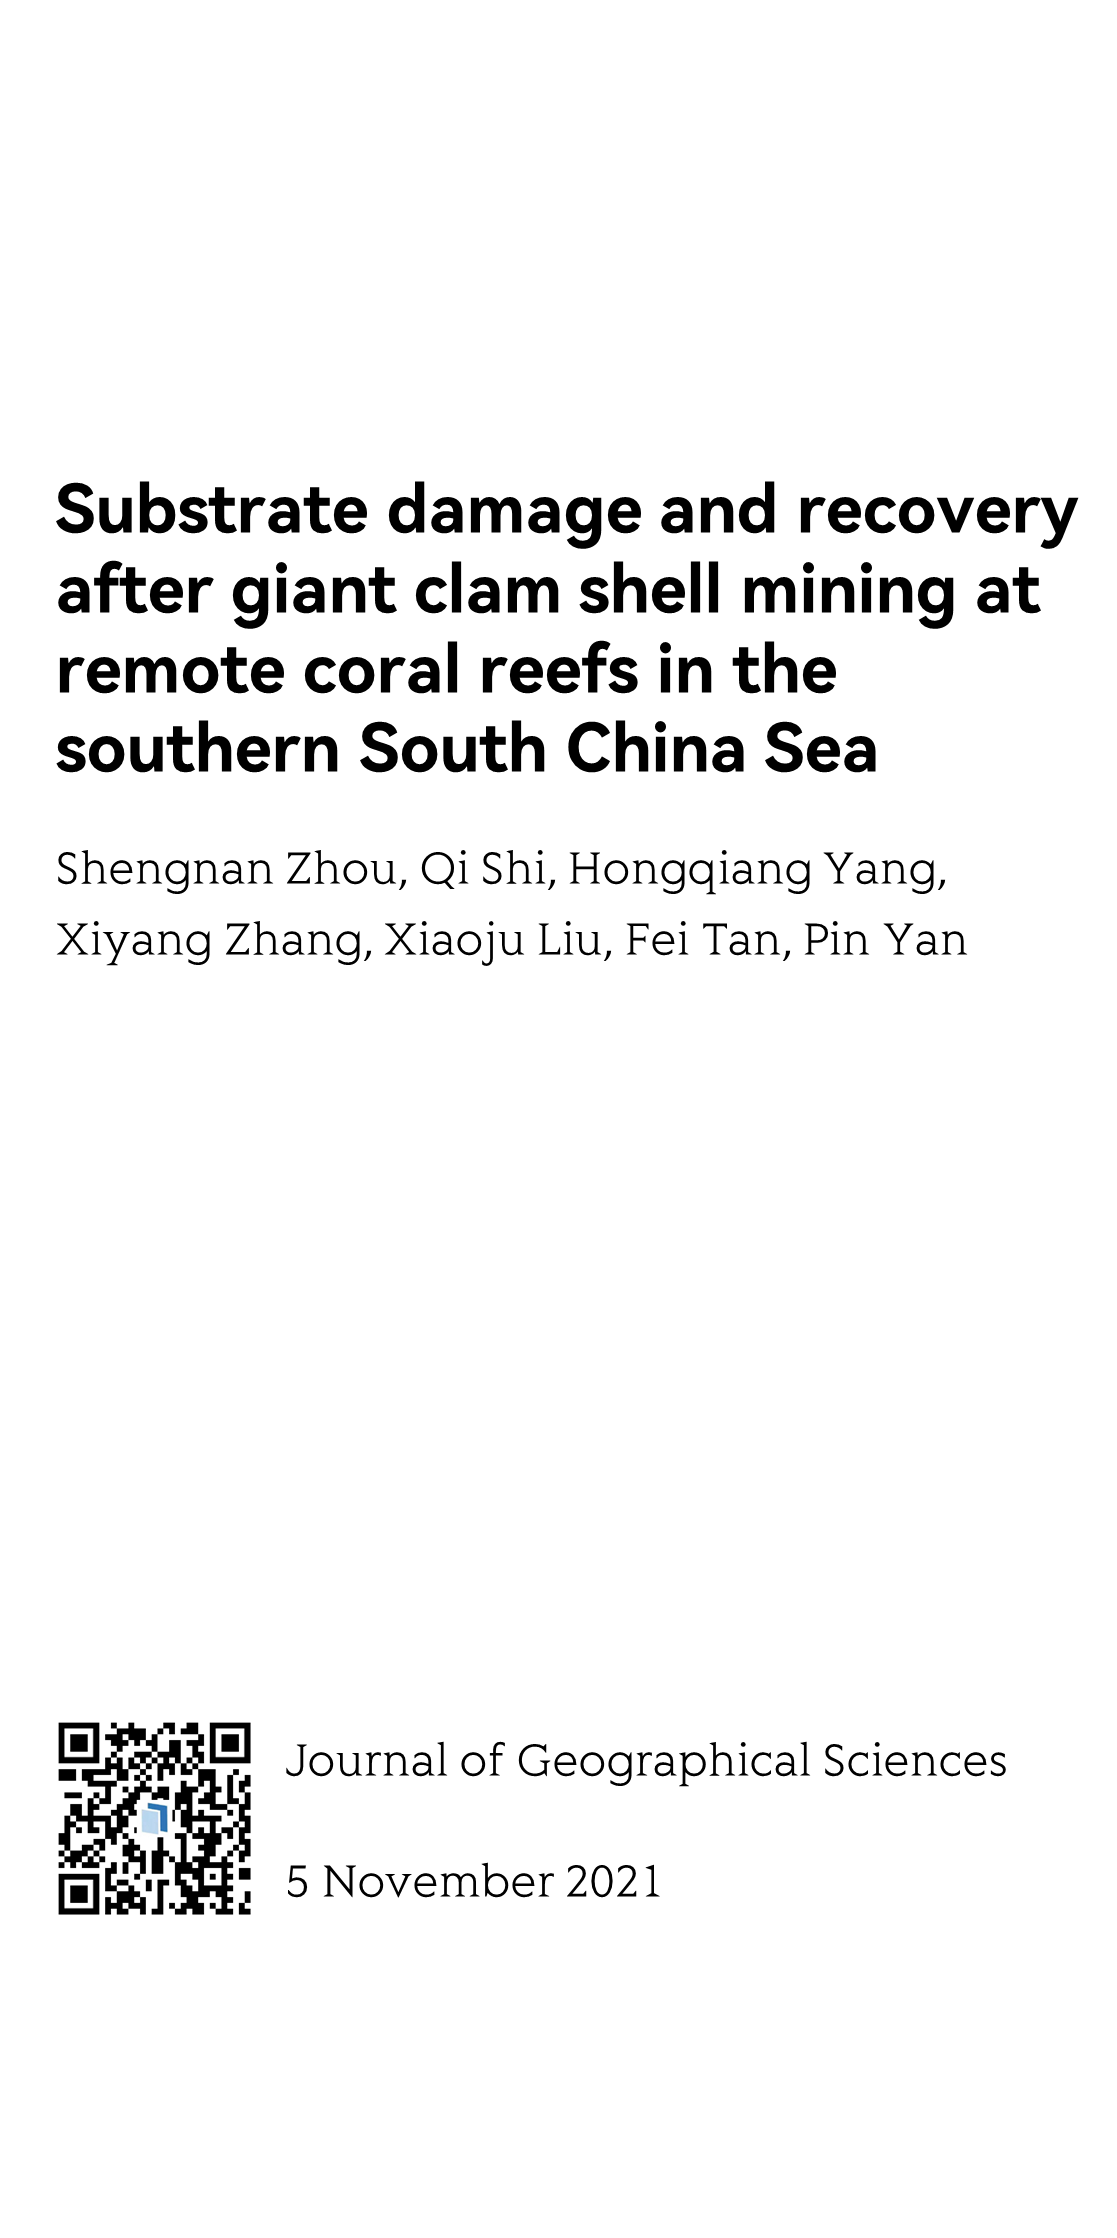 Substrate damage and recovery after giant clam shell mining at remote coral reefs in the southern South China Sea_1